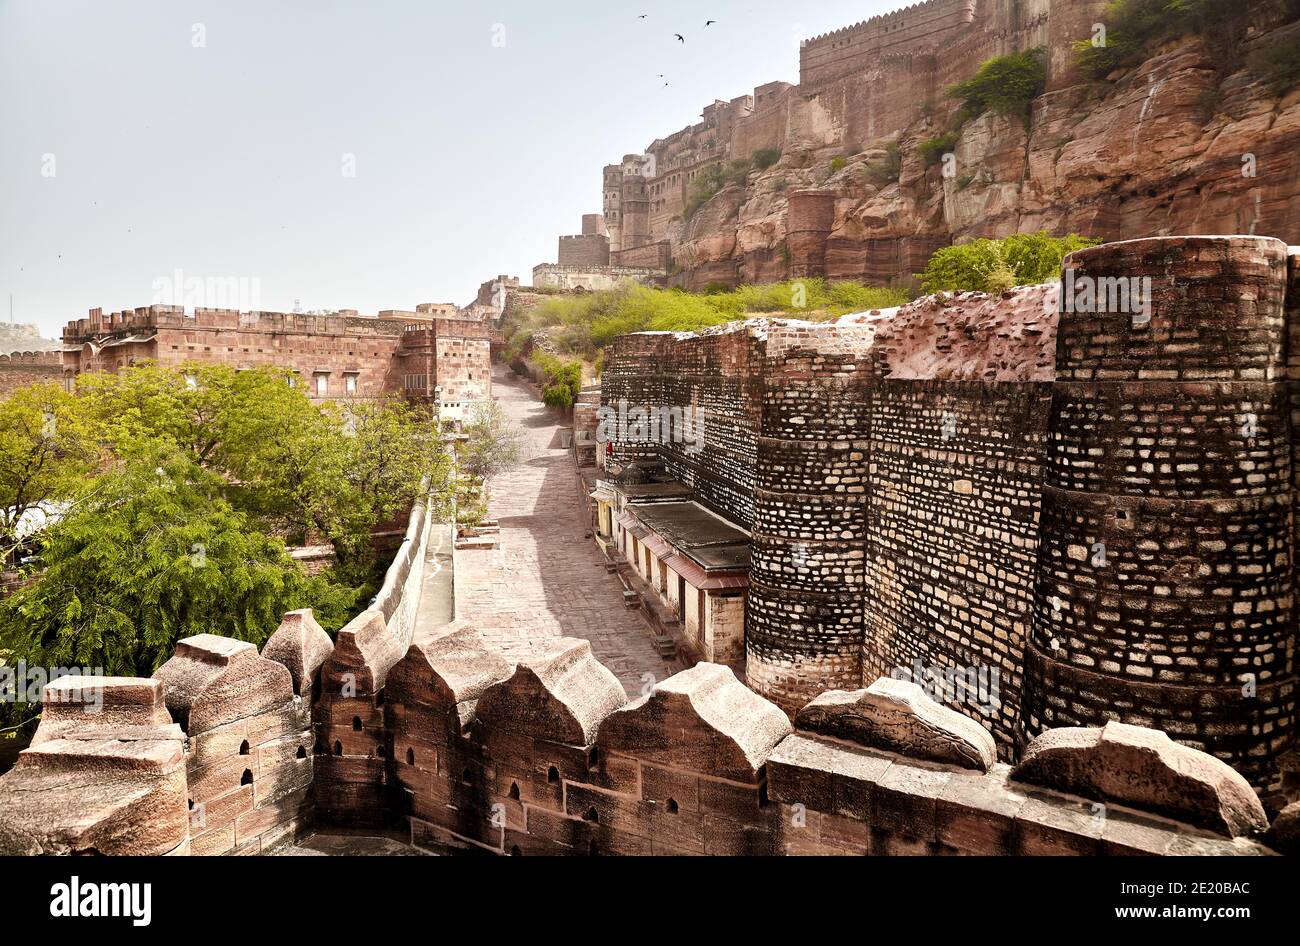 Mehrangarh fort walls and towers at sunset in Blue City of Jodhpur, Rajasthan, India Stock Photo